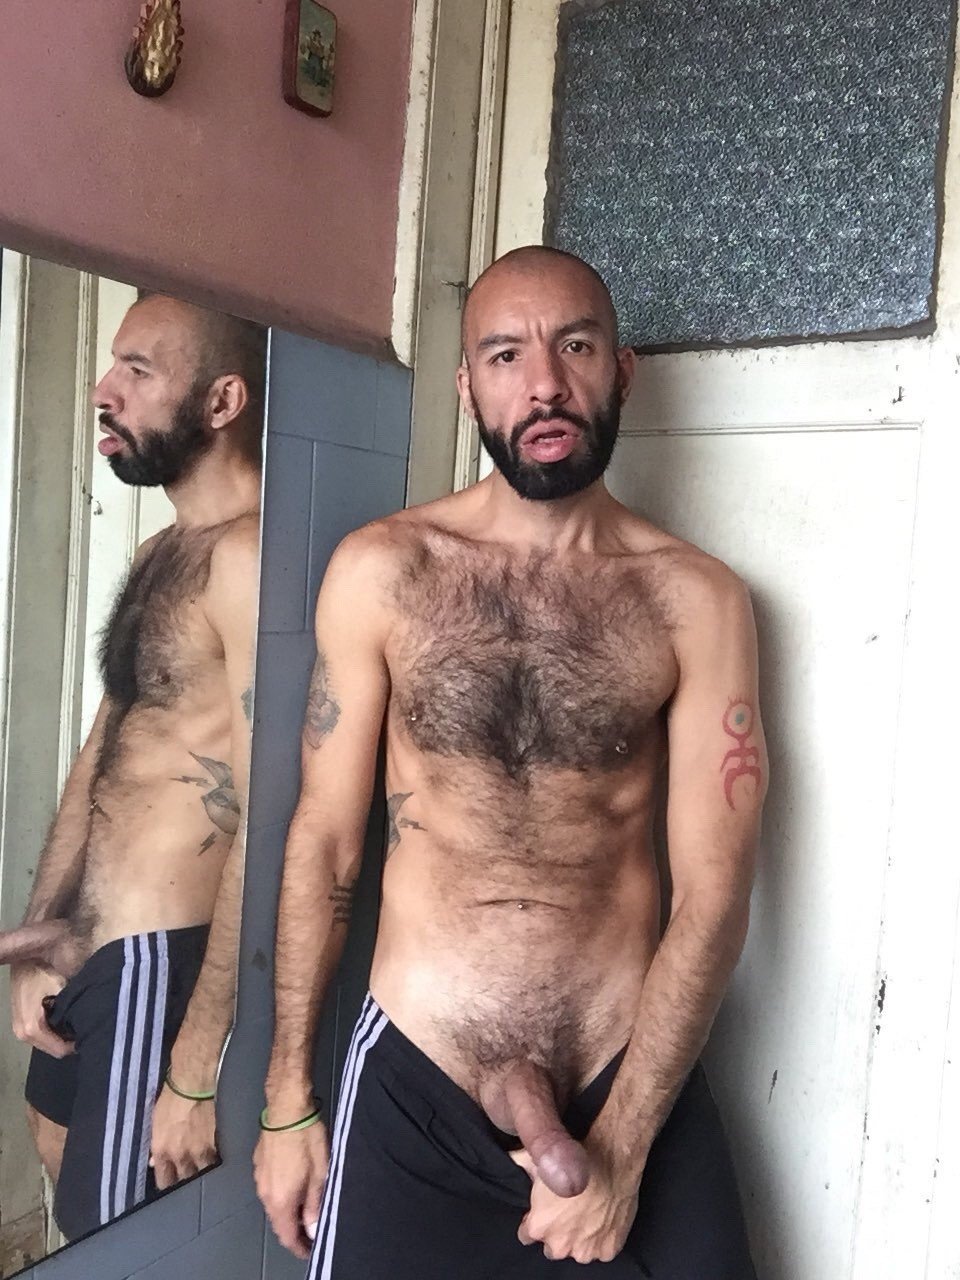 Photo by Smitty with the username @Resol702,  August 25, 2019 at 9:29 PM. The post is about the topic Gay Hairy Men